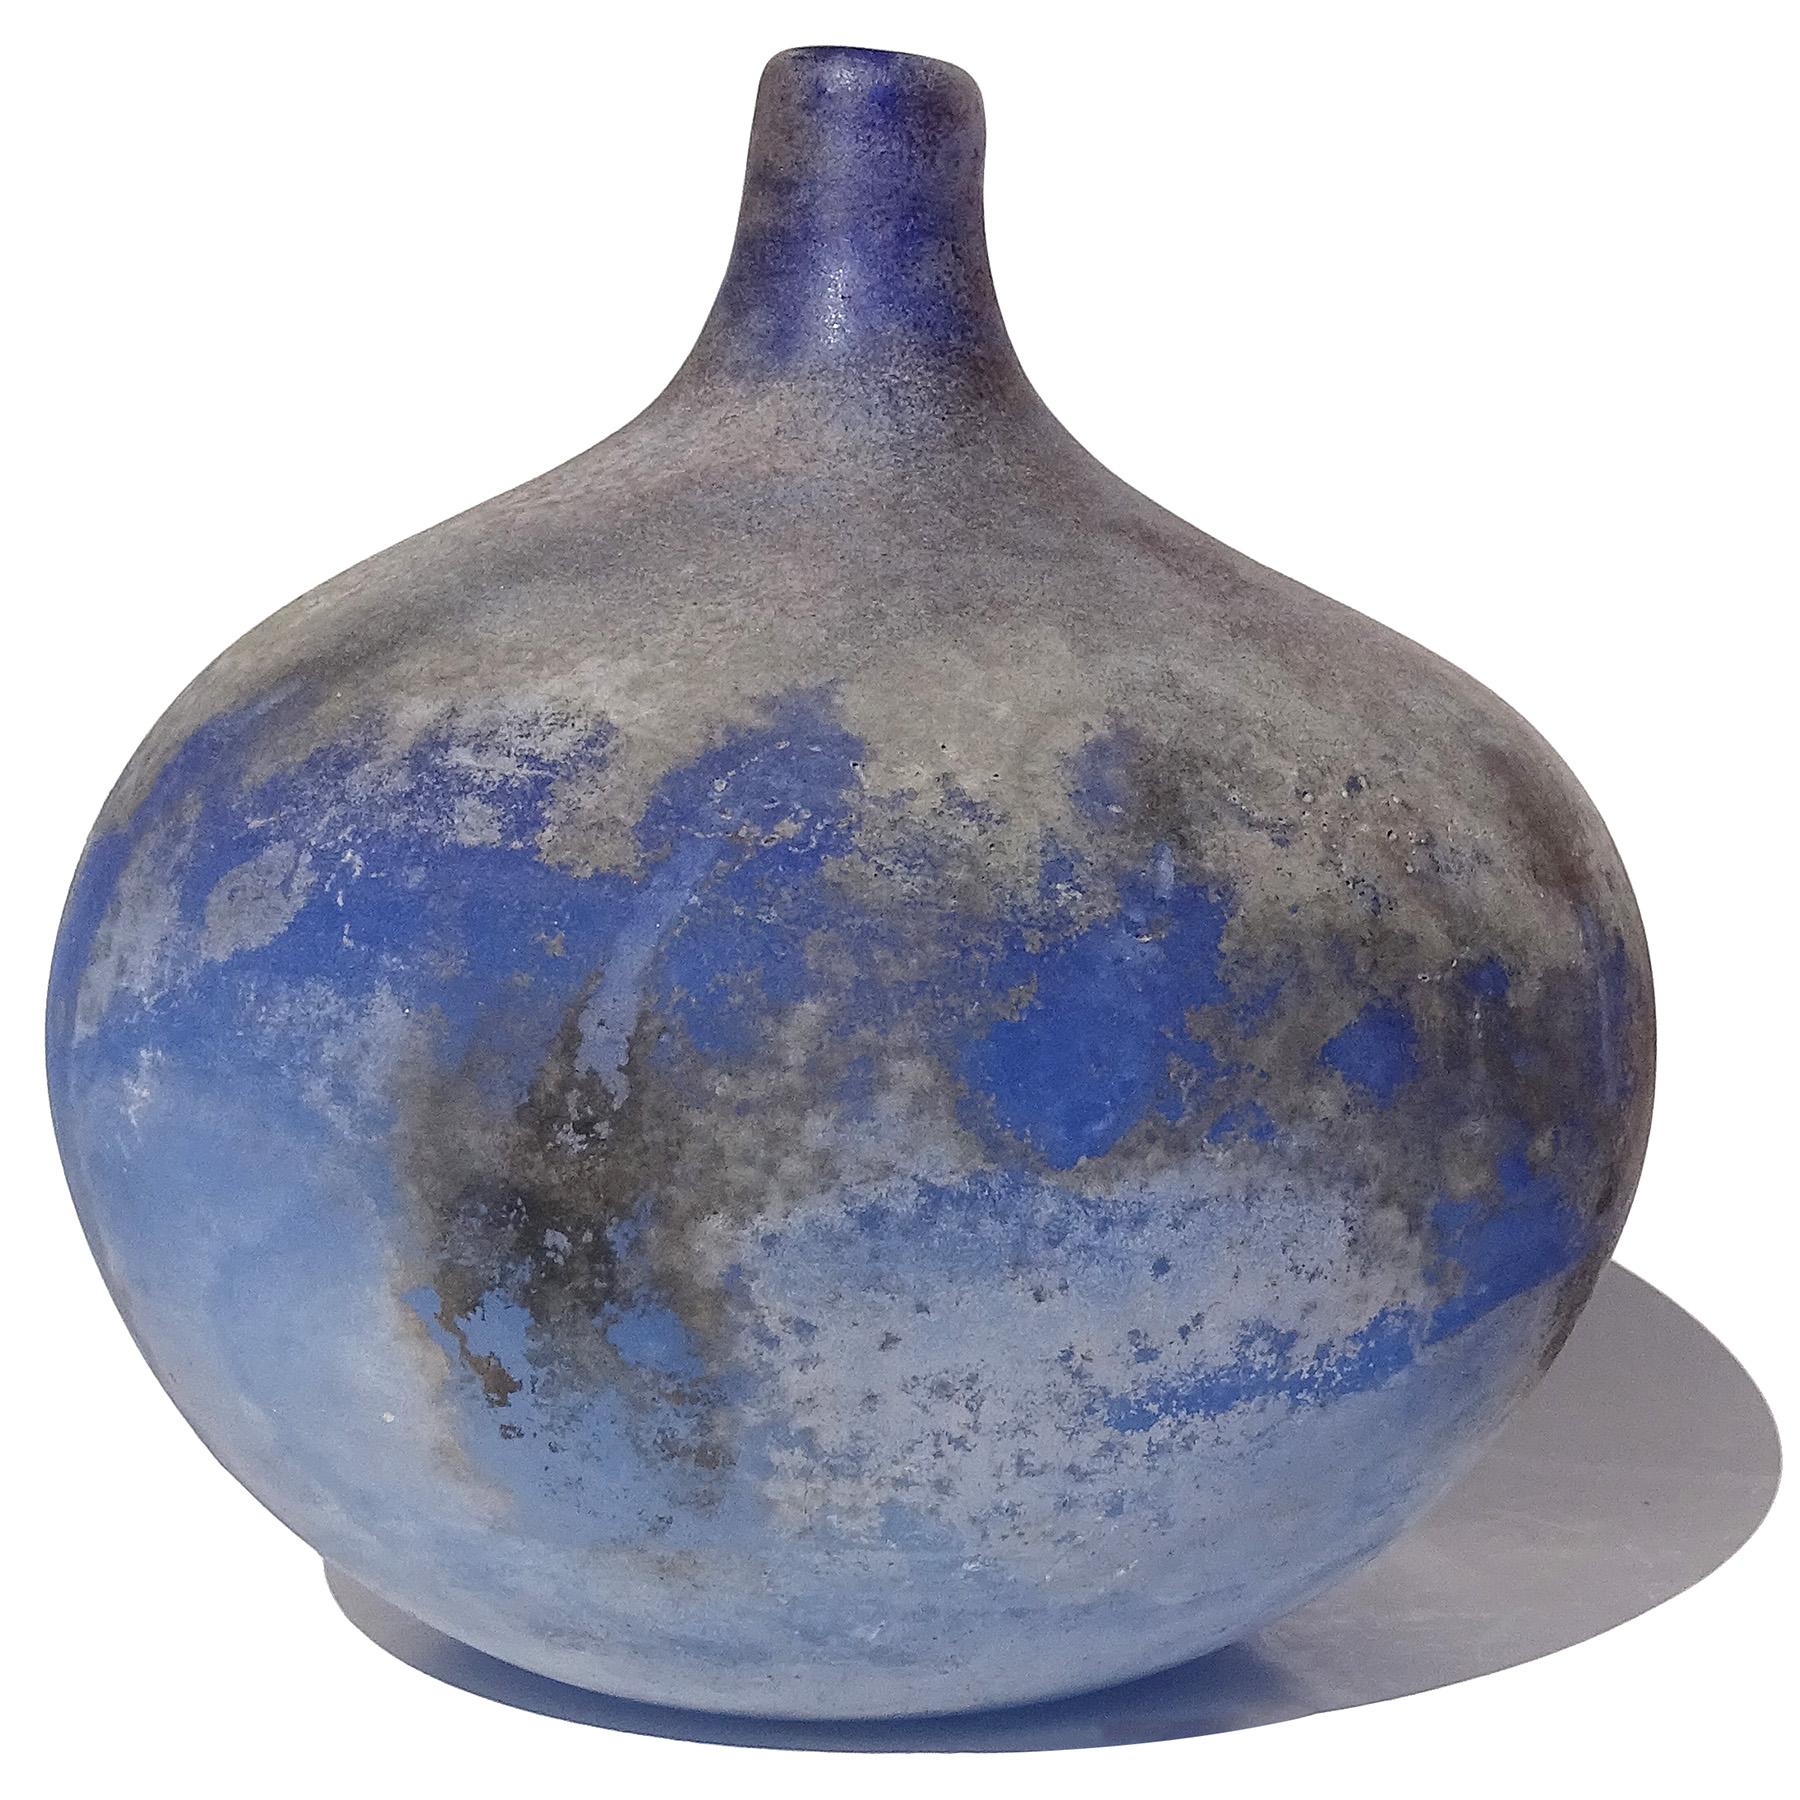 Beautiful and unusual, vintage Murano hand blown rich cobalt blue with excavated surface texture Italian art glass flower vase. The piece is documented to Cenedese company, with labels and signature on the bottom. Attributed to designer Antonio Da